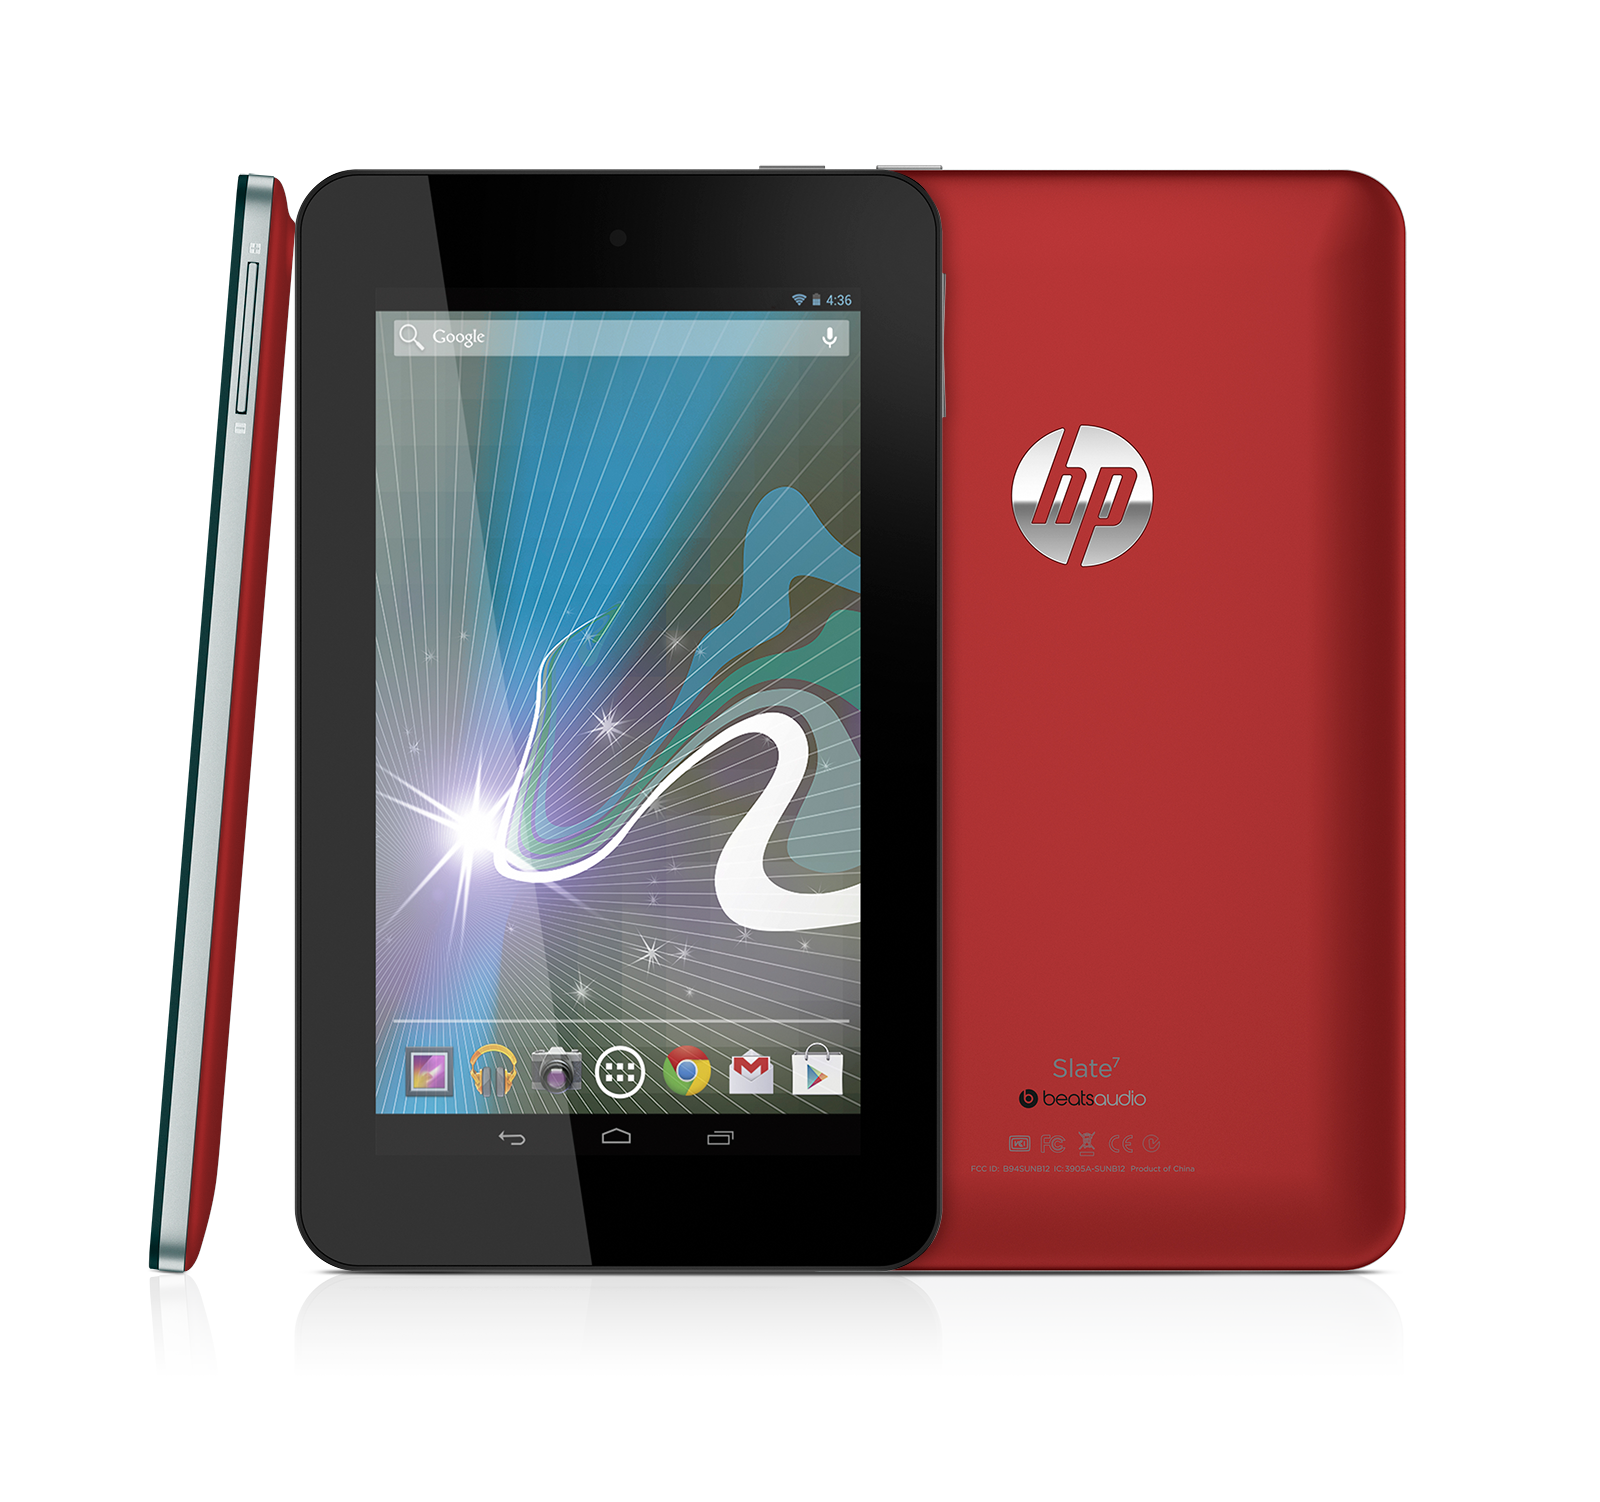 Company News in Egypt: HP Launches Slate7 Android Consumer Tablet in ...